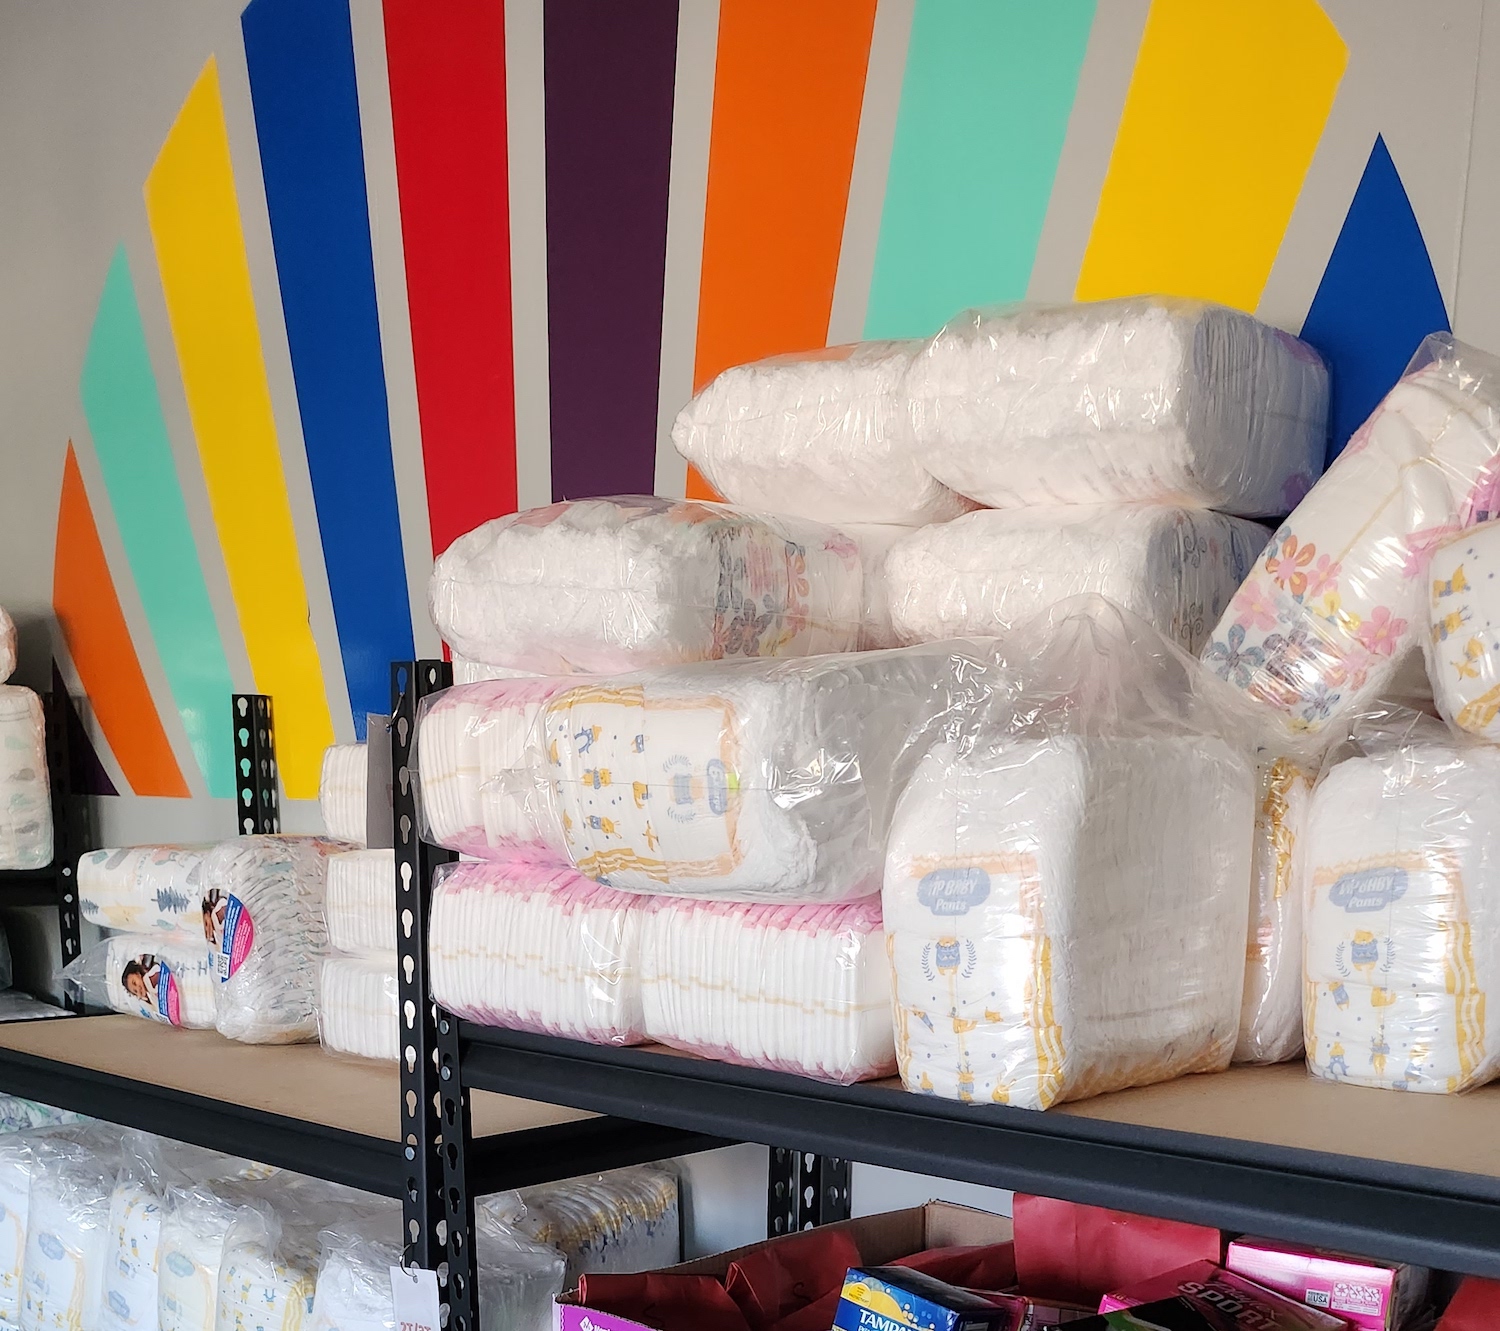 Image of diaper packs on shelf in front of All-Options logo painted on the wall